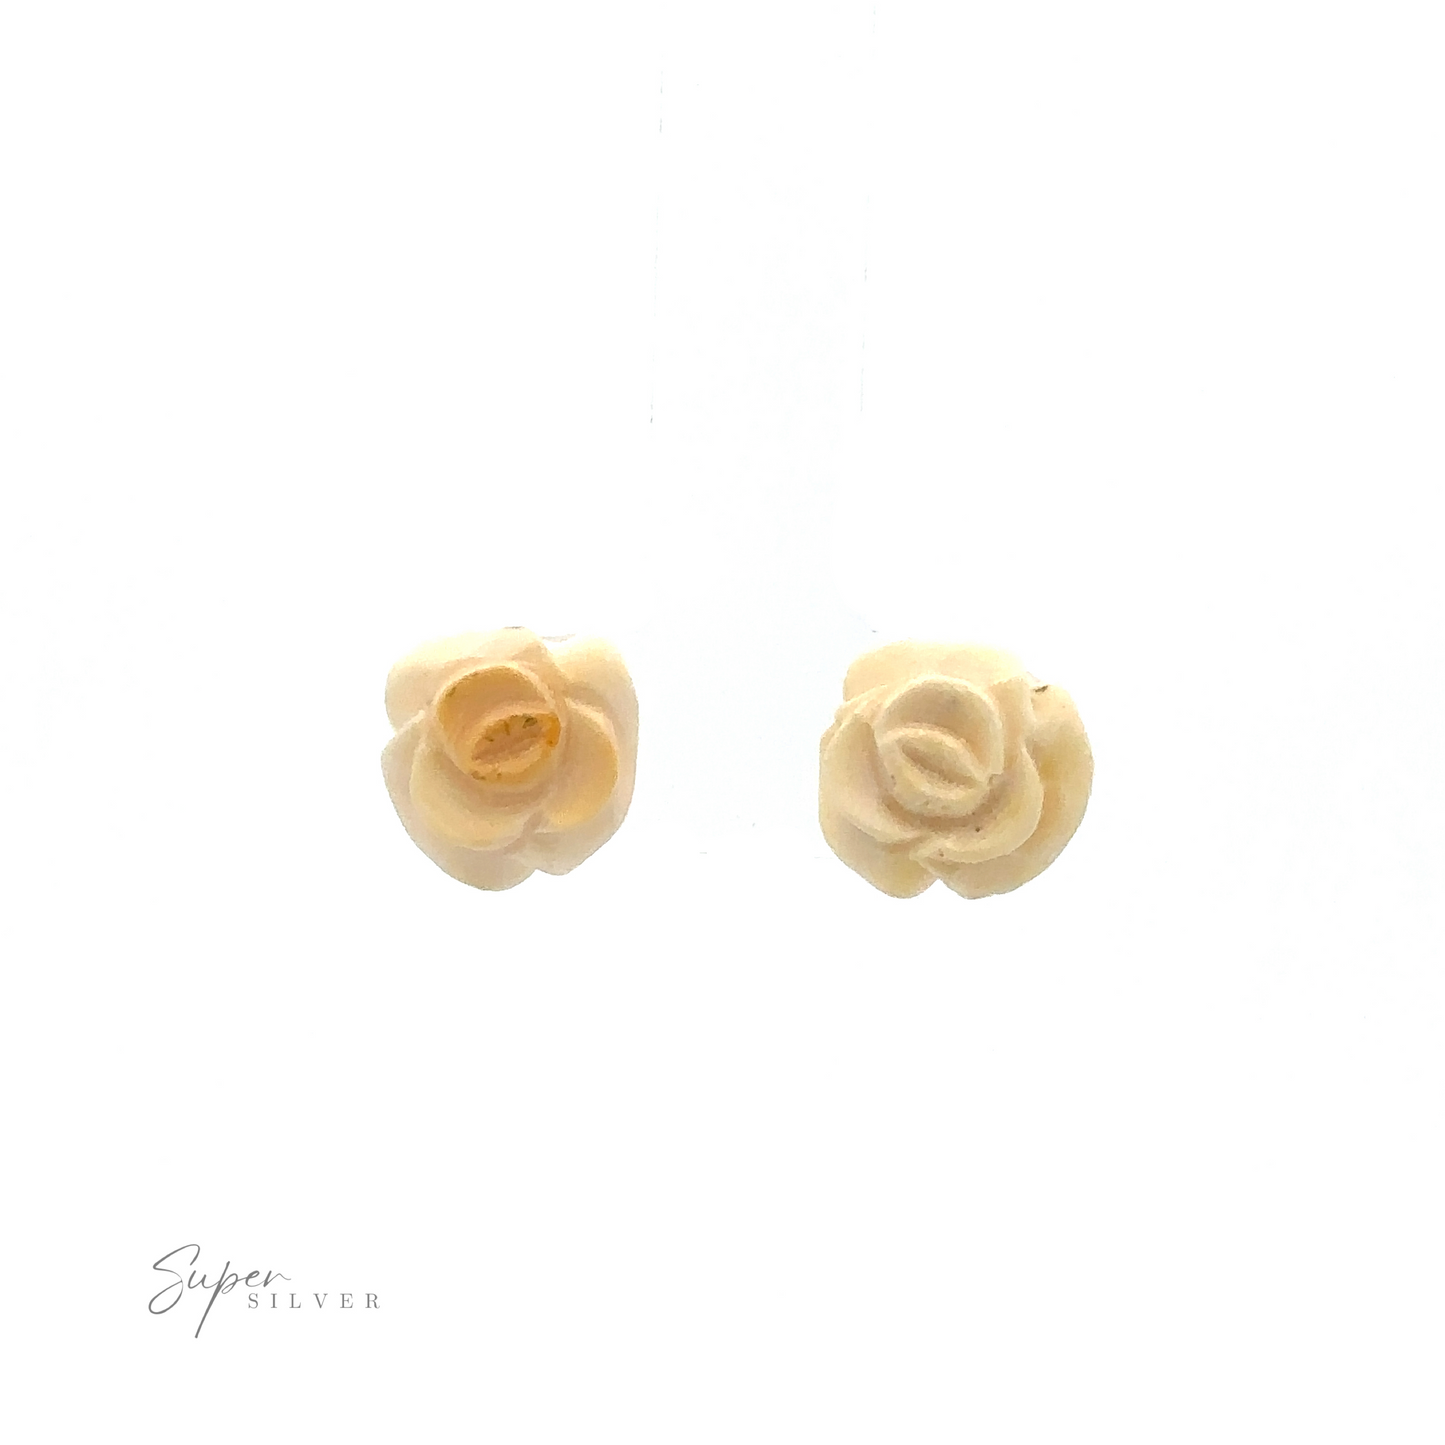 
                  
                    Two small, cream-colored, rose-shaped earrings with "Butterscotch Amber Rose Studs" written in the corner against a plain white background. These elegant sterling silver earrings offer a timeless touch to any outfit.
                  
                